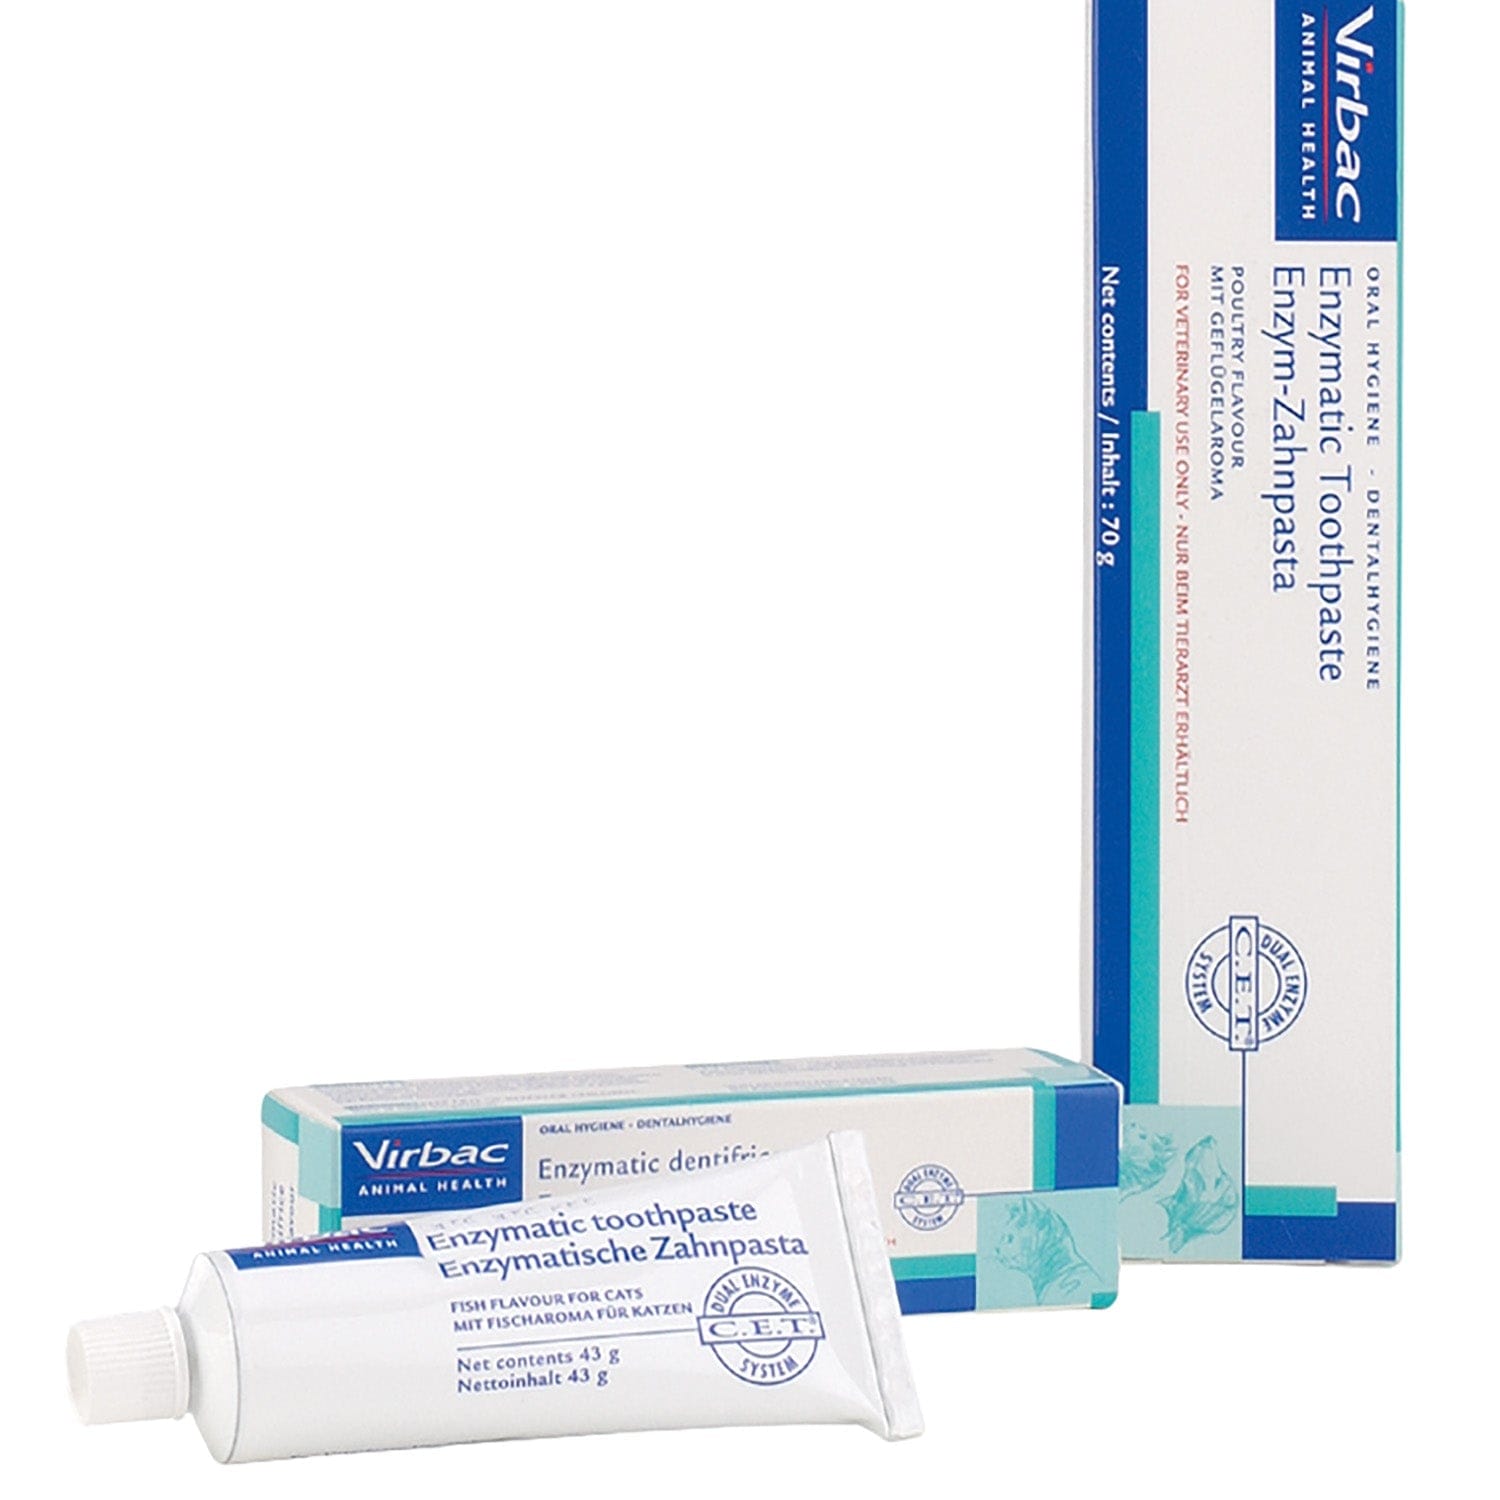 Enzymatic toothpaste poultry flavour